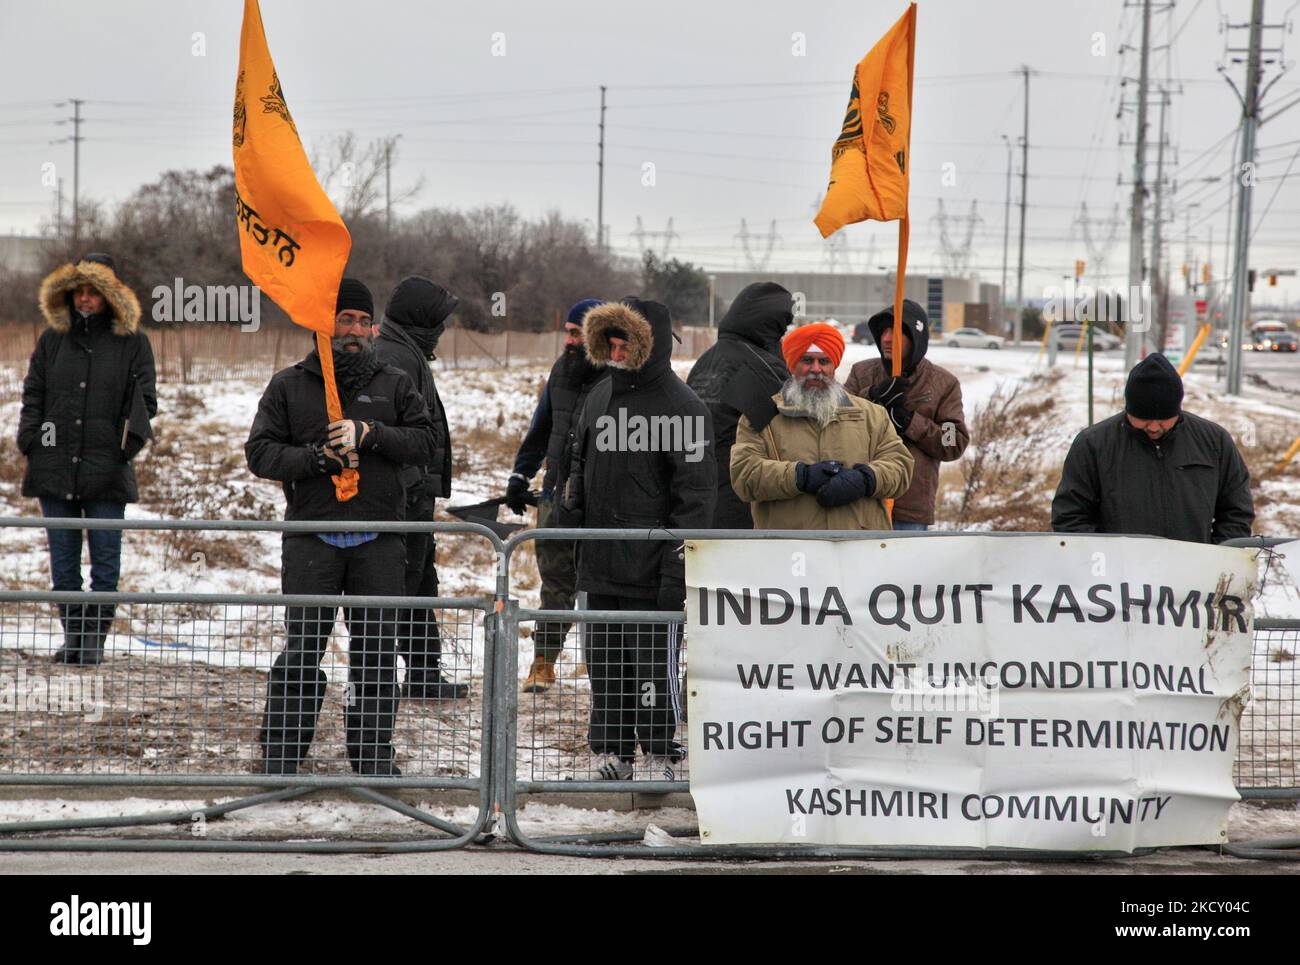 February 01, 2015 --- Mississauga, Ontario, Canada --- Canadian Pro-Khalistan Sikhs protesting against the Indian government and calling for a separate Sikh state as well as showing their disapproval for the Indian army's presence in Indian-controlled Kashmir. A large group of Sikhs assembled outside a venue where celebrations for India's 66th Republic Day were taking place to show their discontent with the Indian government. The Khalistan movement seeks to create a separate Sikh state, called Khalistan in the Punjab region of India and has been a controversial topic. As well the issue of Kash Stock Photo